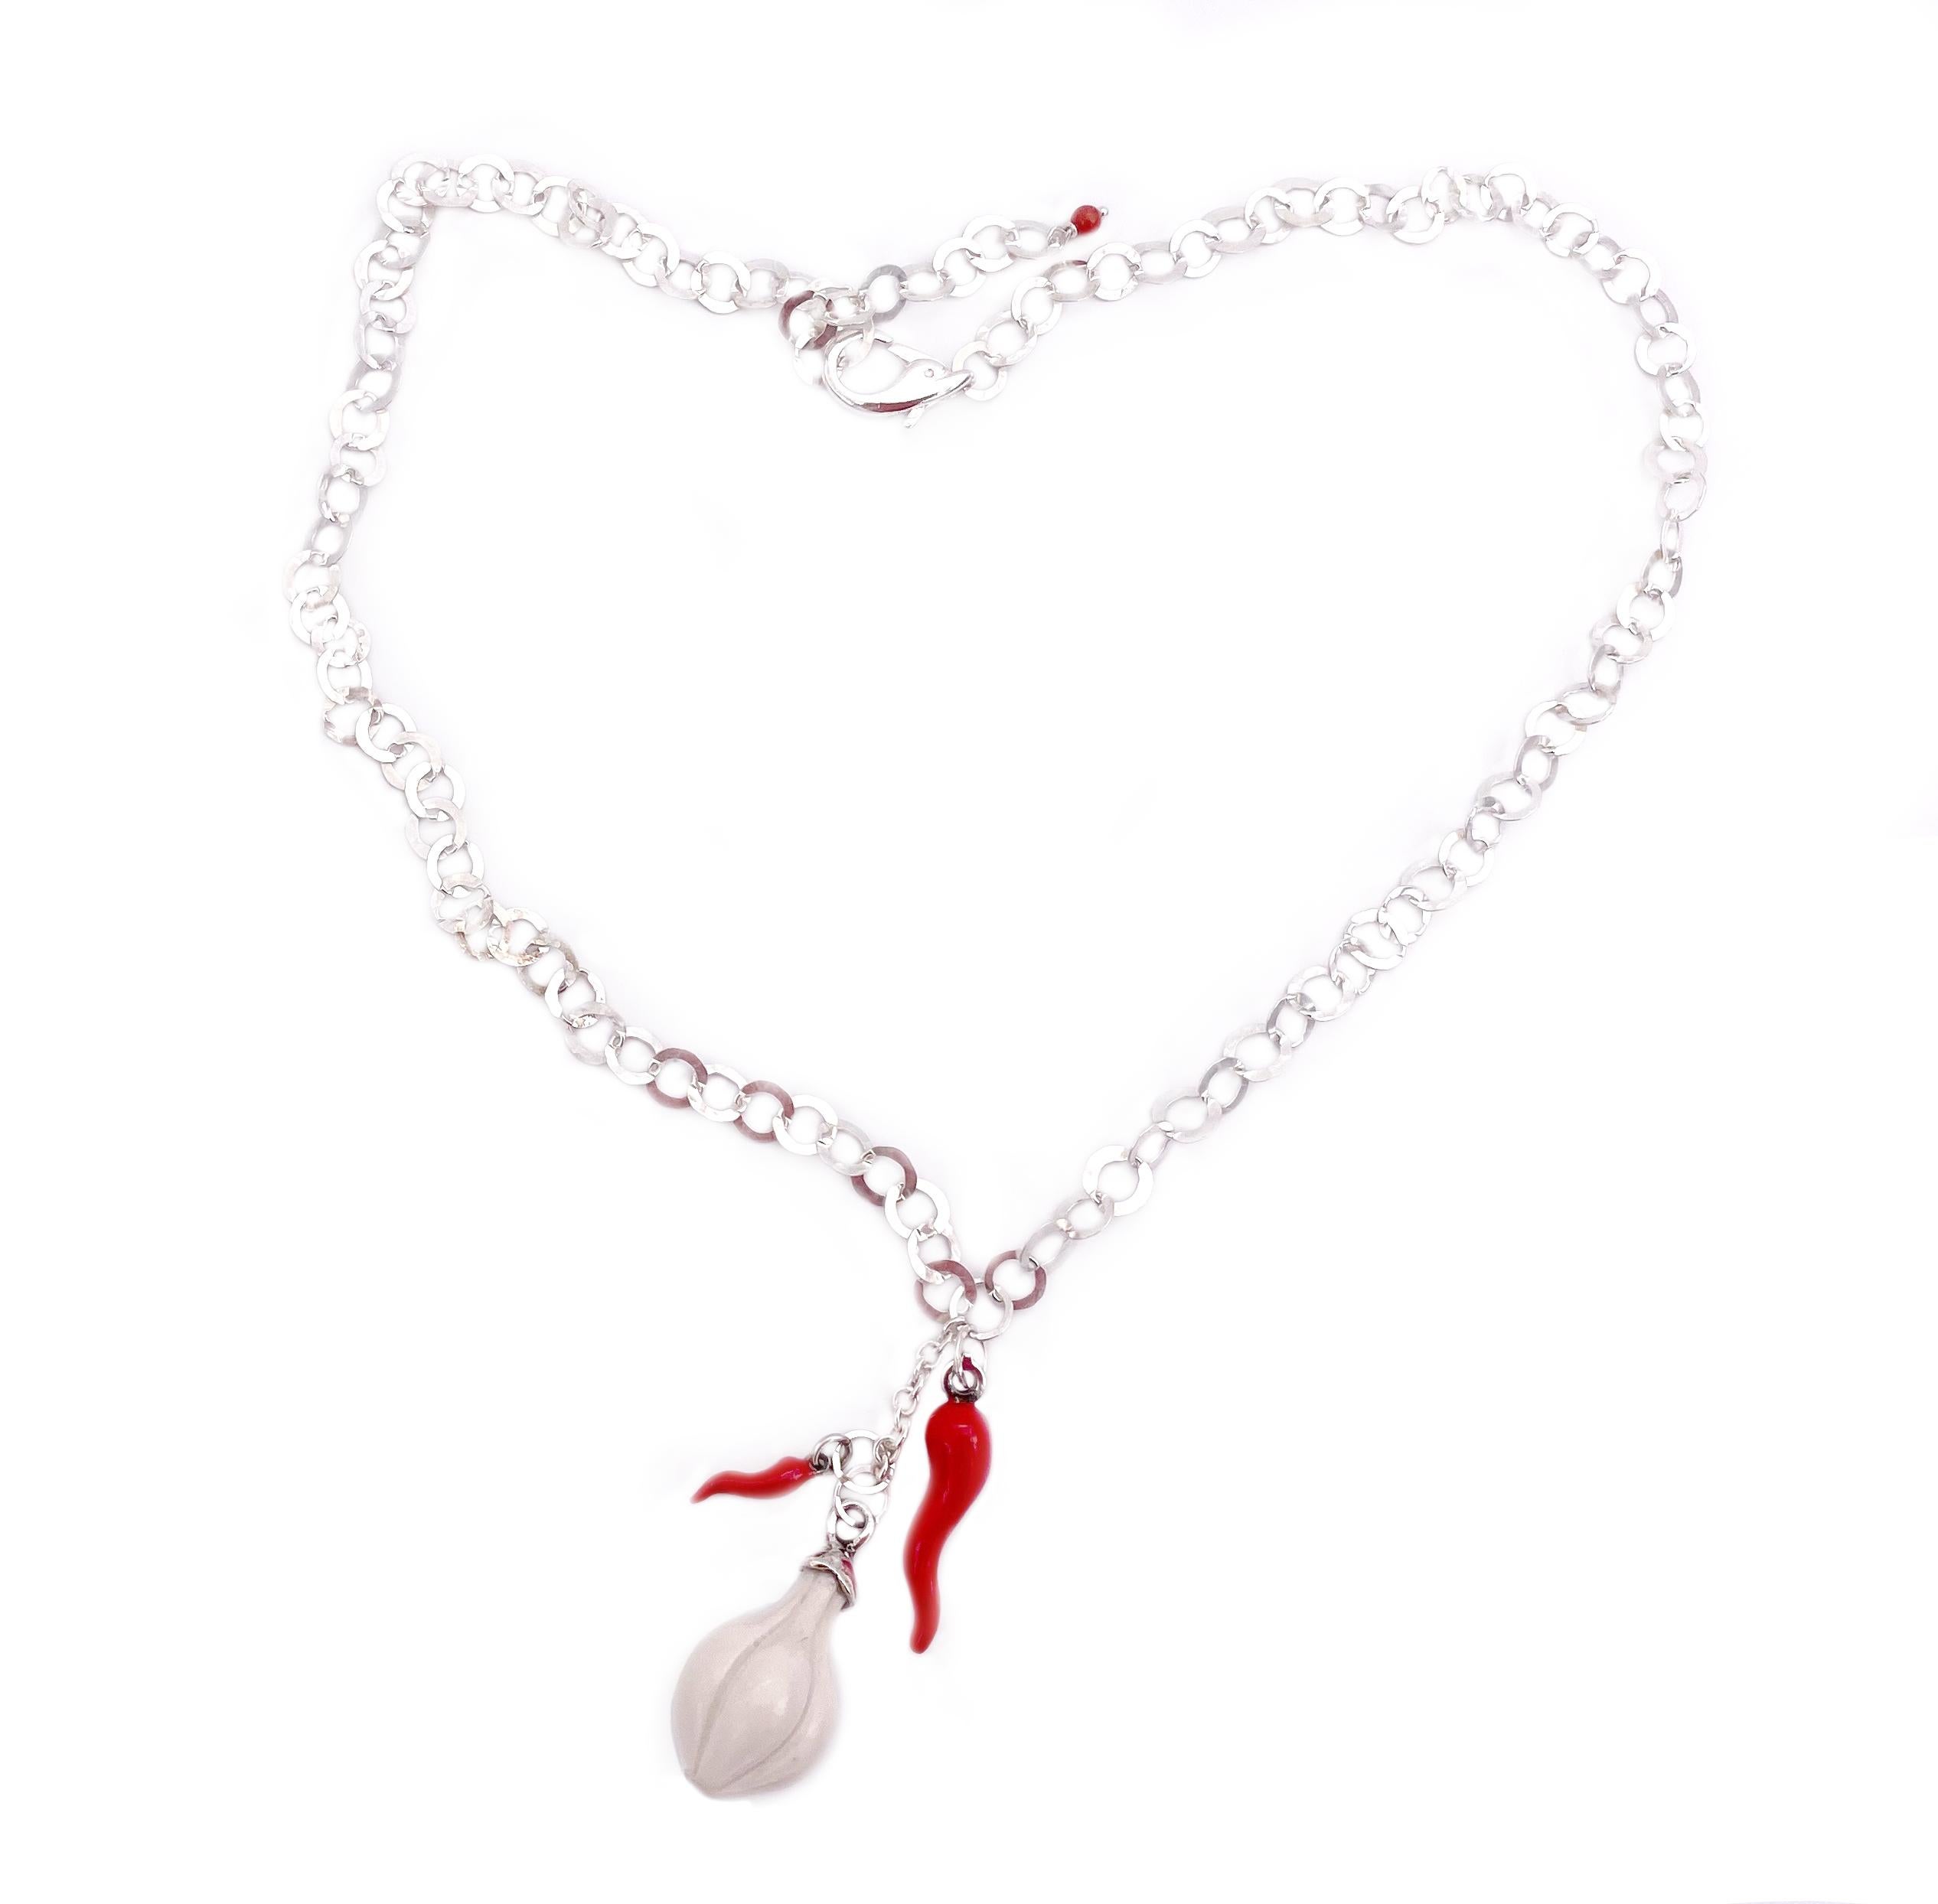 Modern Red Chili Pepper & Garlic Silver Starling Lucky Chain Amulet Pendant Necklace For Sale